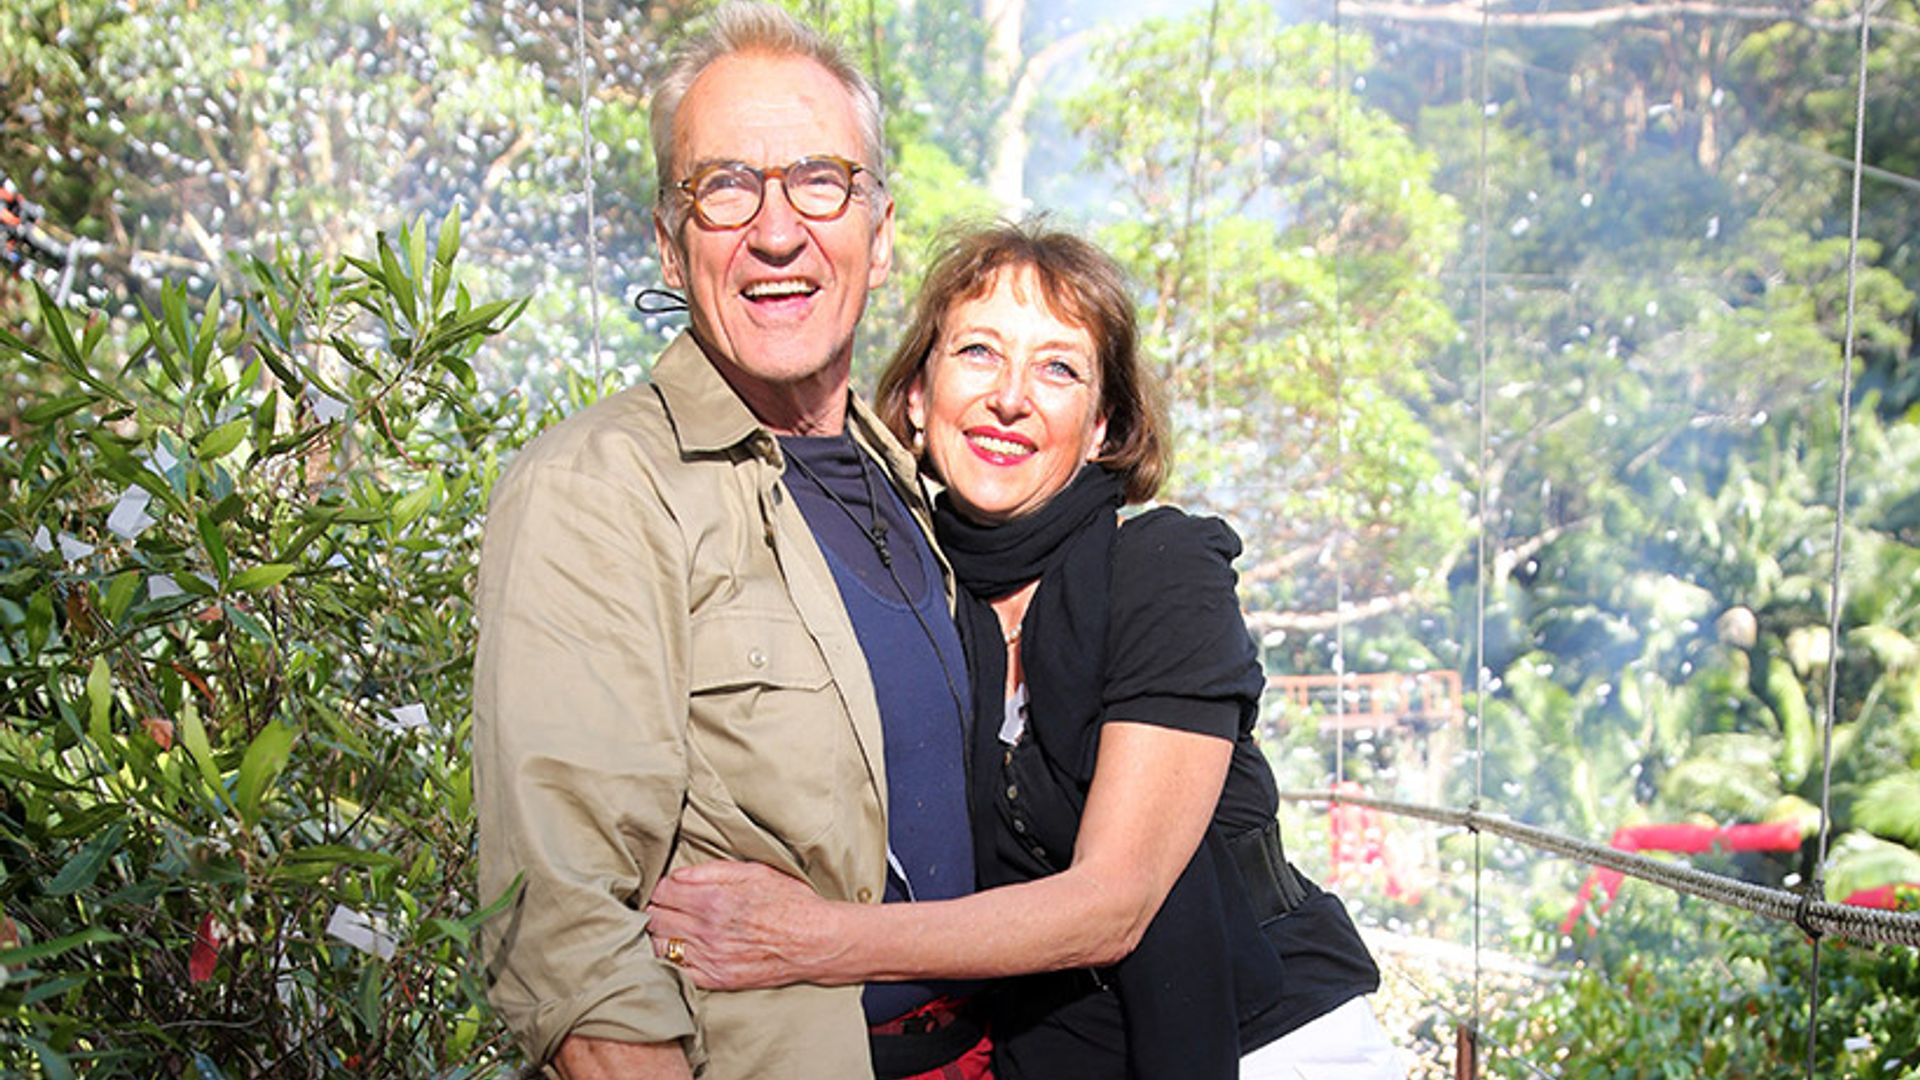 Larry Lamb moves on with new woman after splitting from partner of 20 years Clare Burt